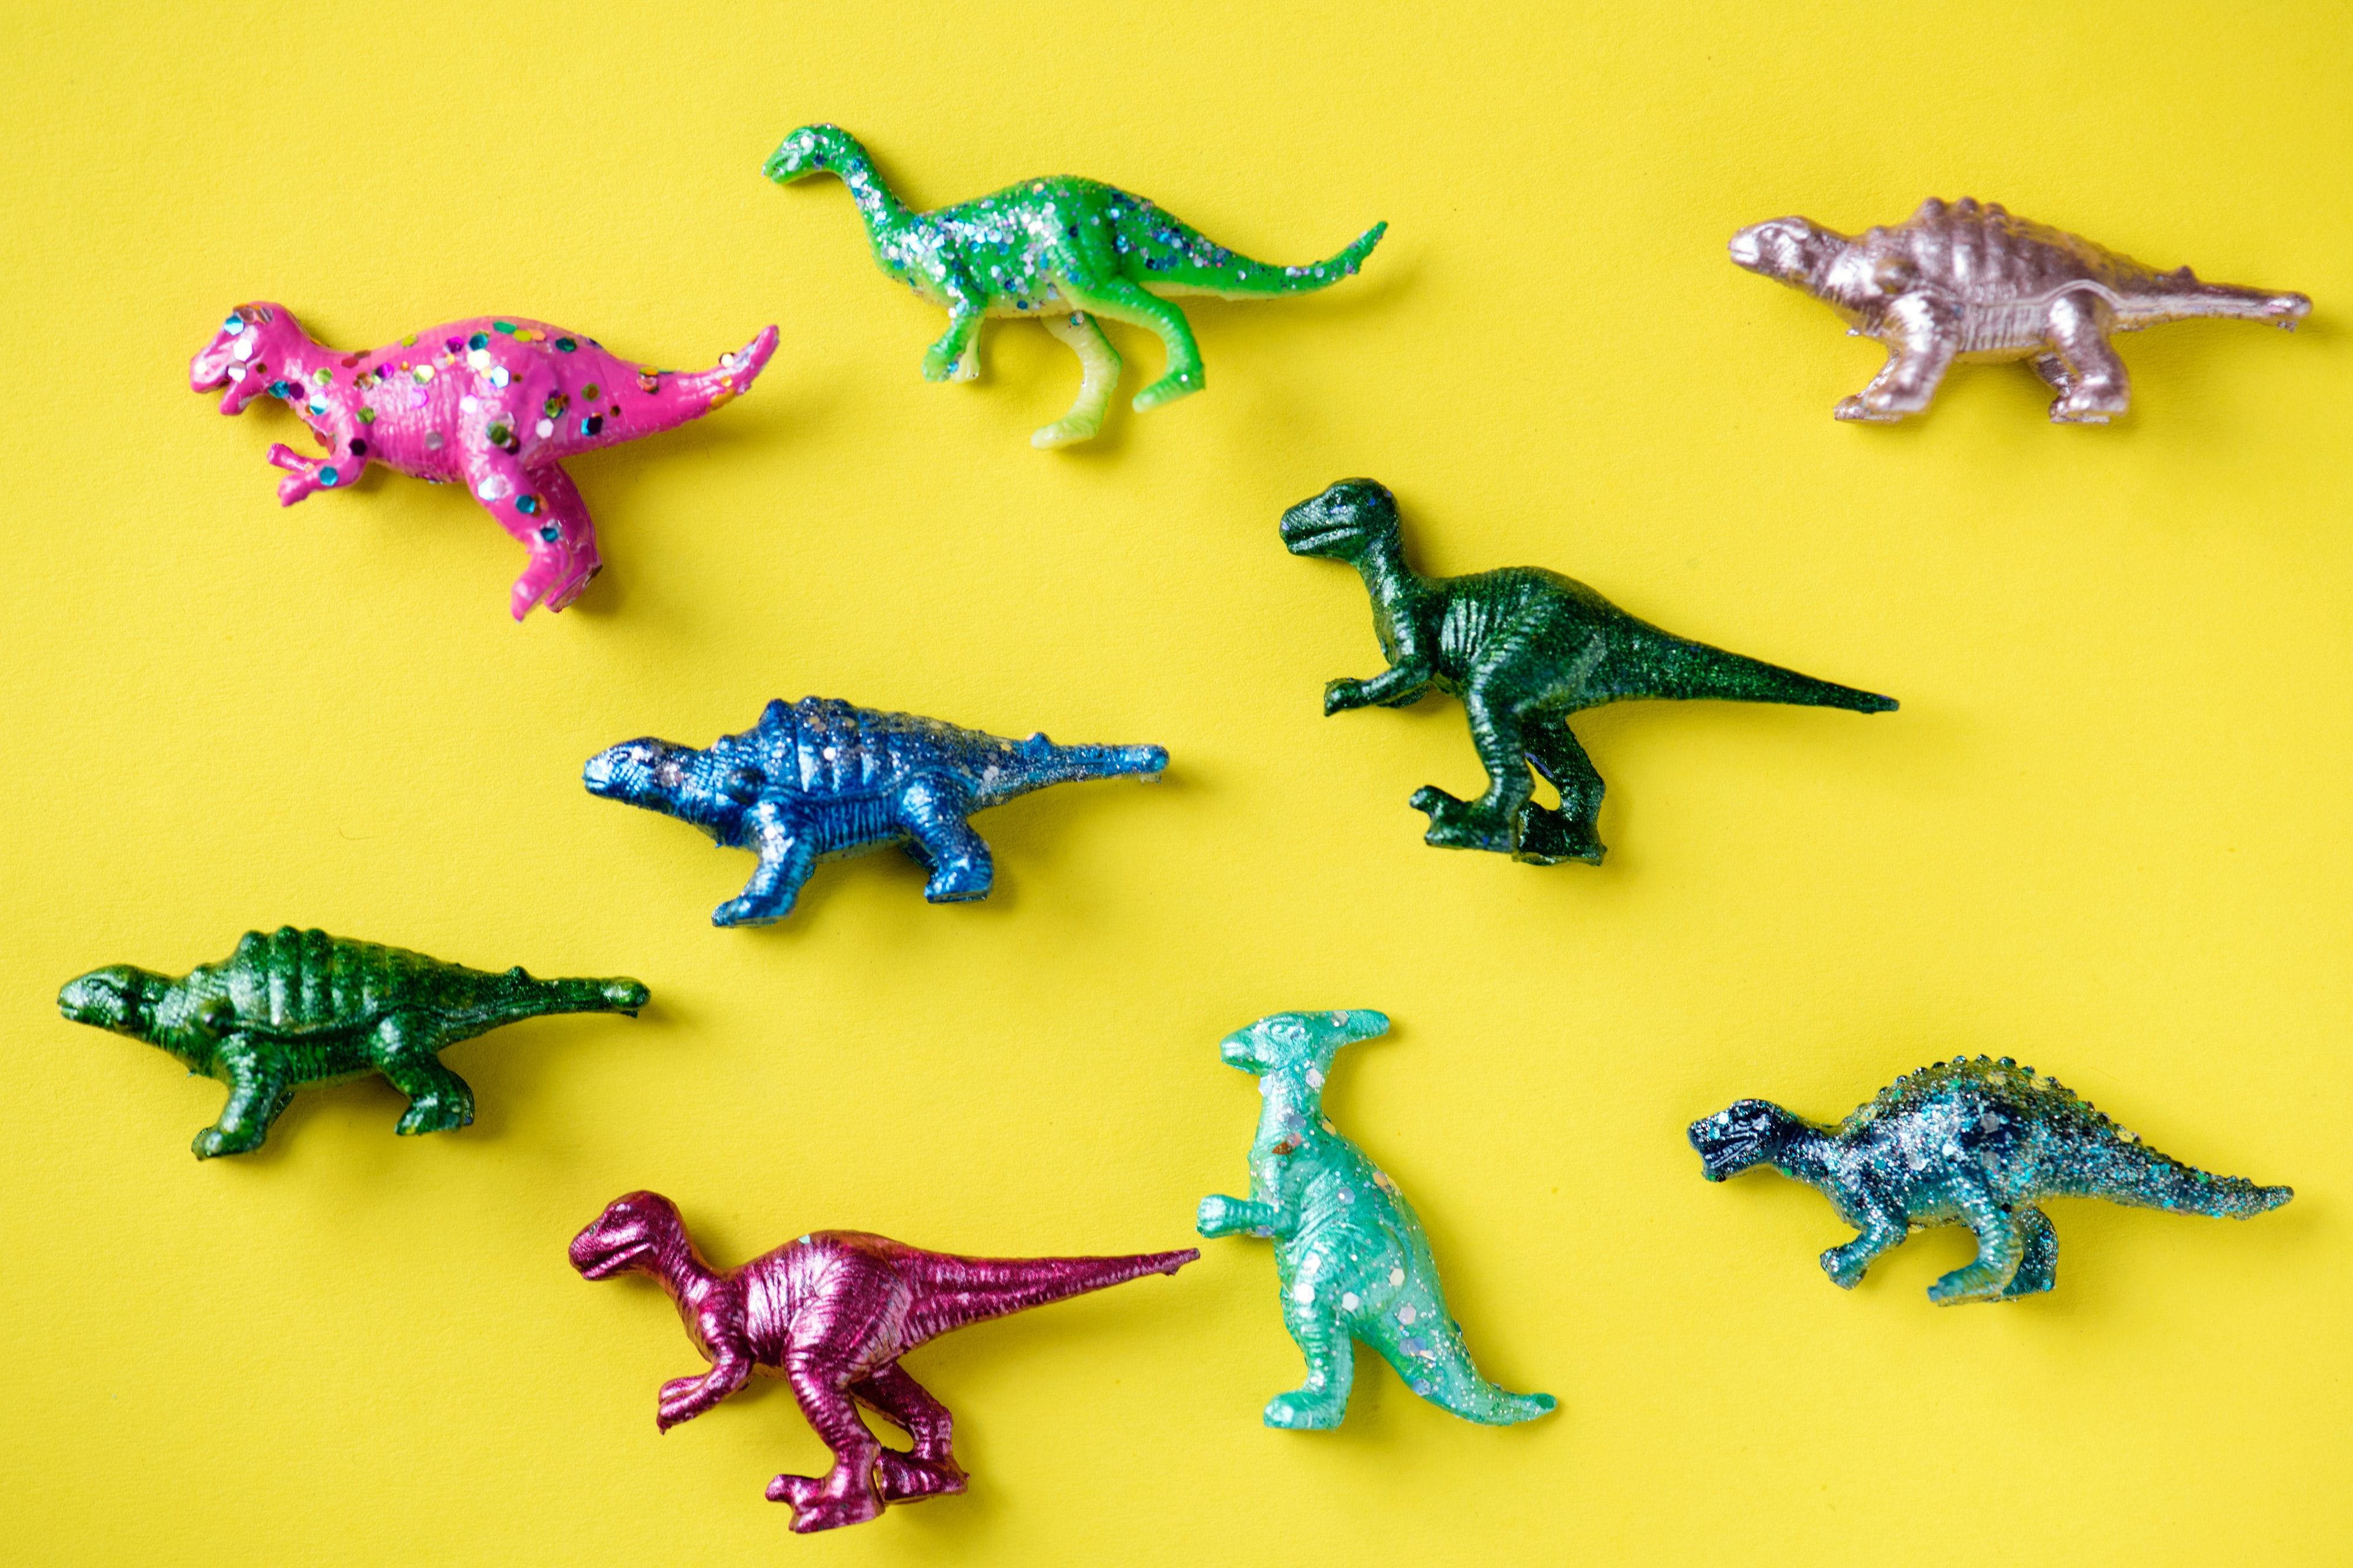 Bright colored dinosaur toys played out against a bright yellow background.